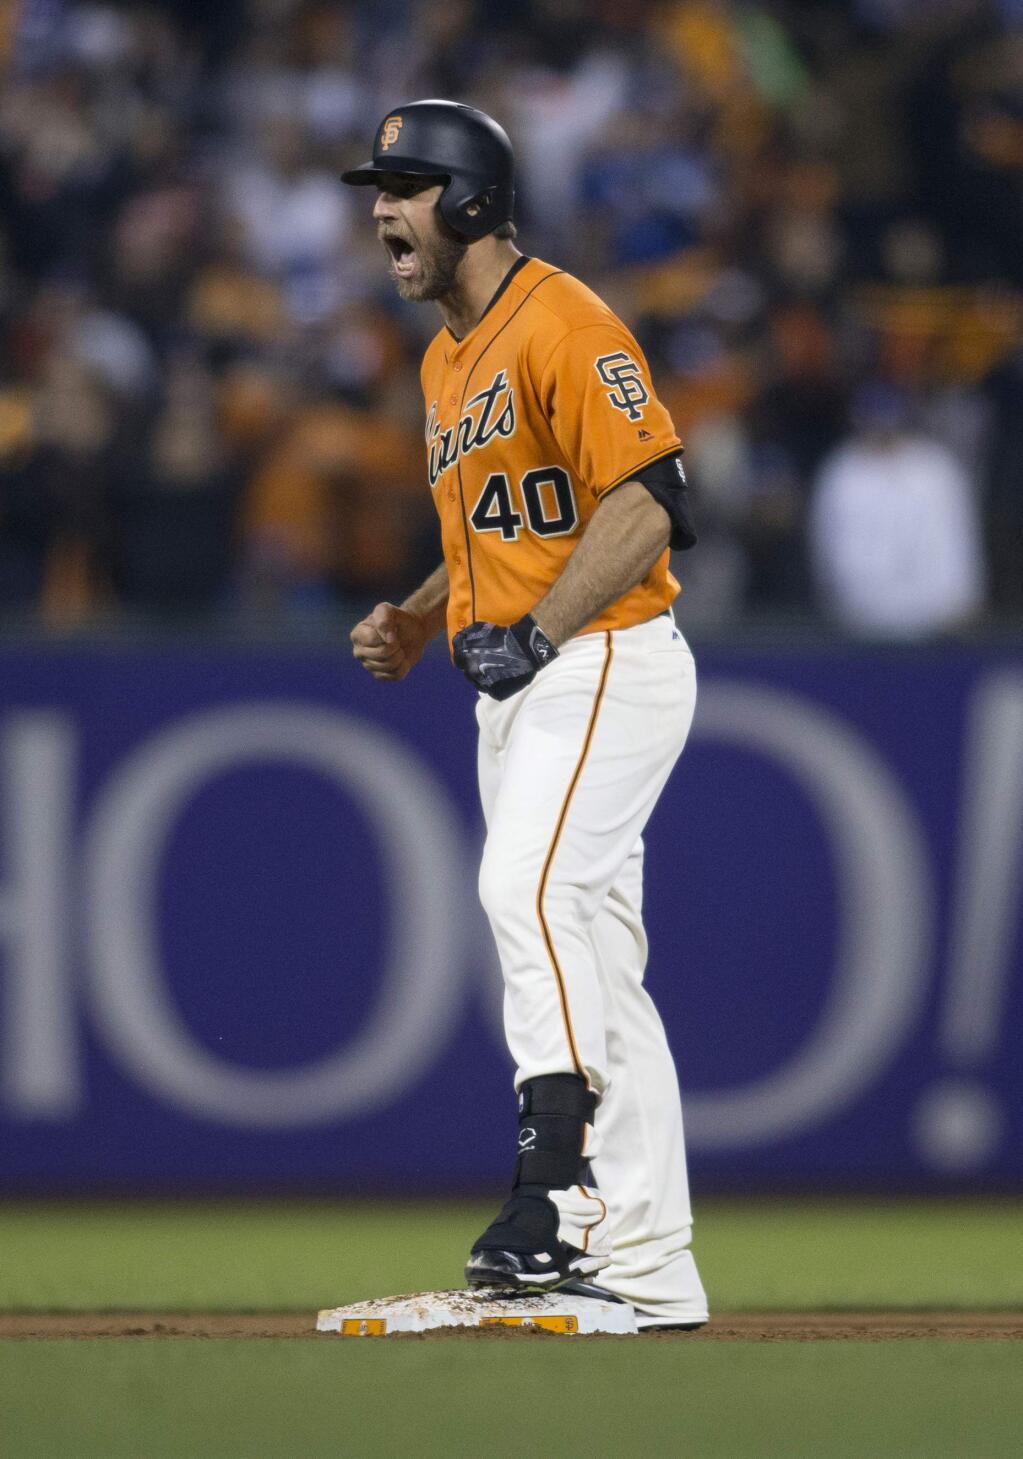 San Francisco Giants starting pitcher Madison Bumgarner reacts to his two-run double against the Los Angeles Dodgers during the sixth inning of a baseball game, Friday, Sept. 30, 2016, in San Francisco. (AP Photo/D. Ross Cameron)